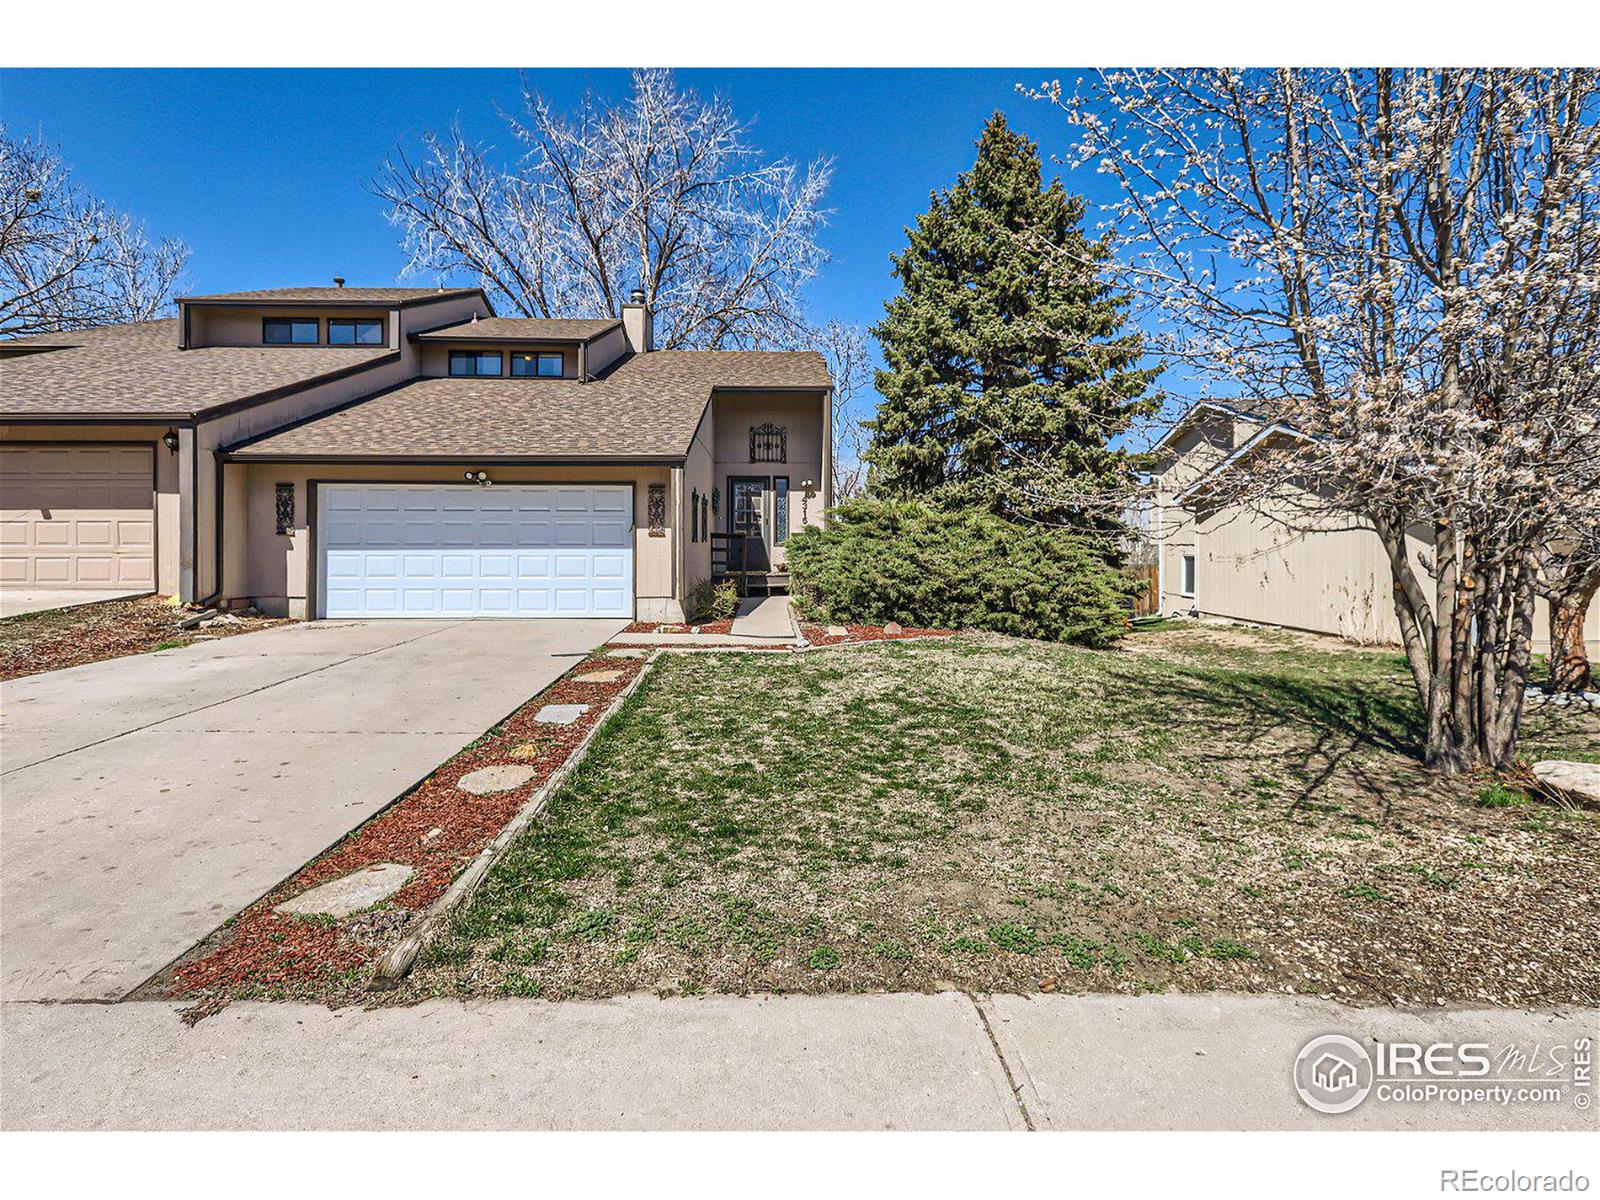 Report Image for 4315 W 9th St Rd,Greeley, Colorado